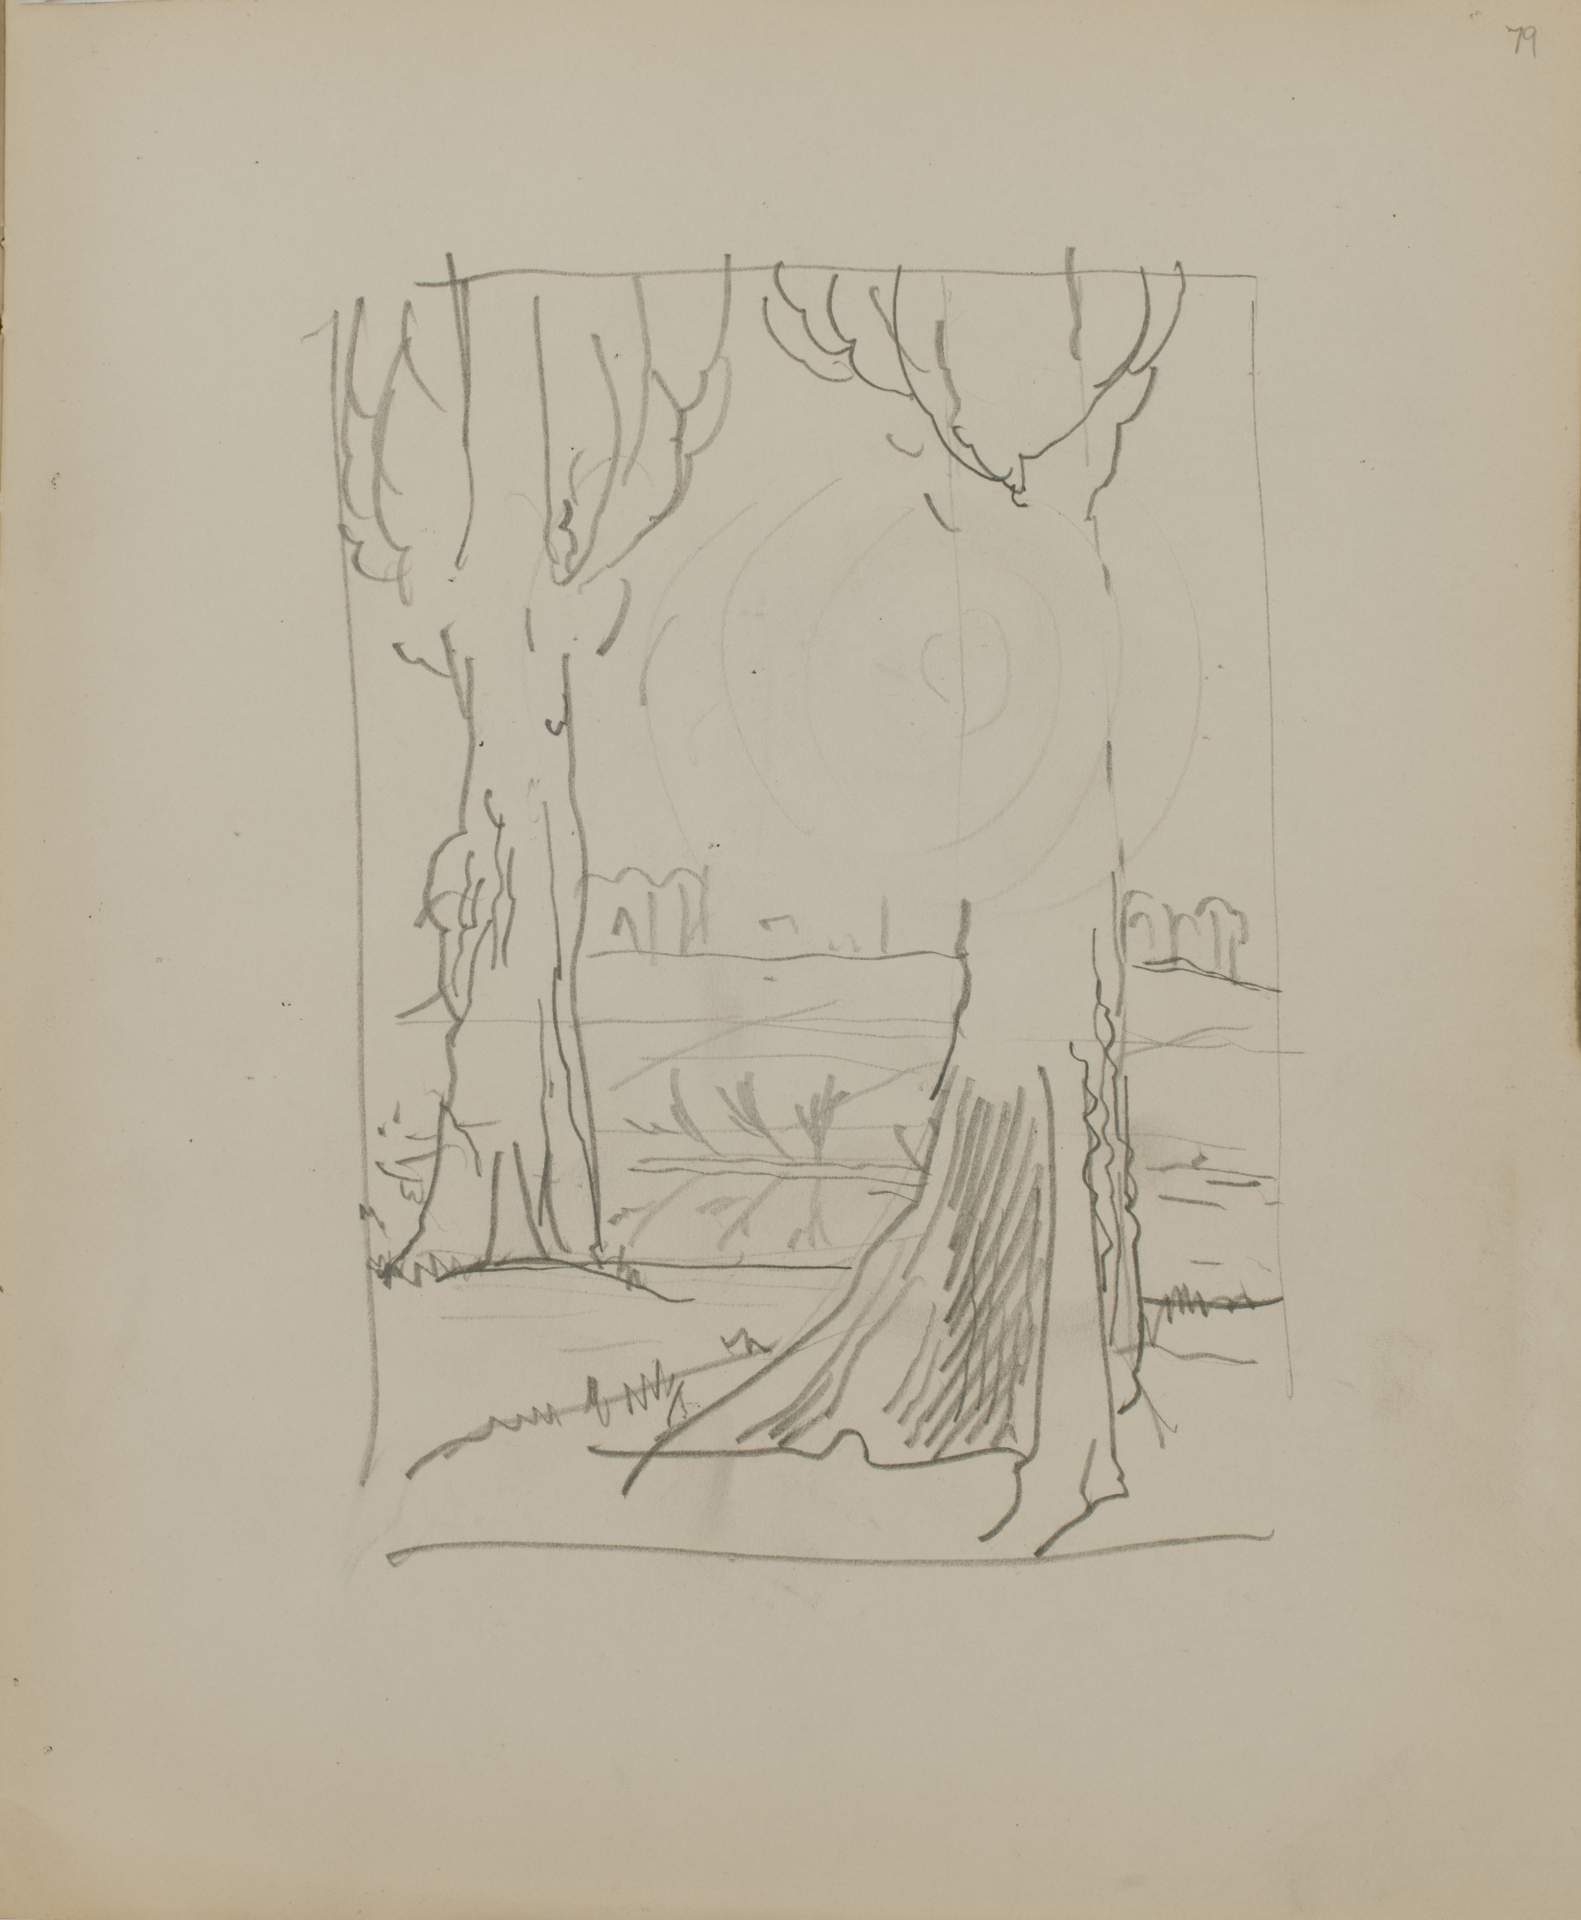 Untitled (sketch of a trees in a field)